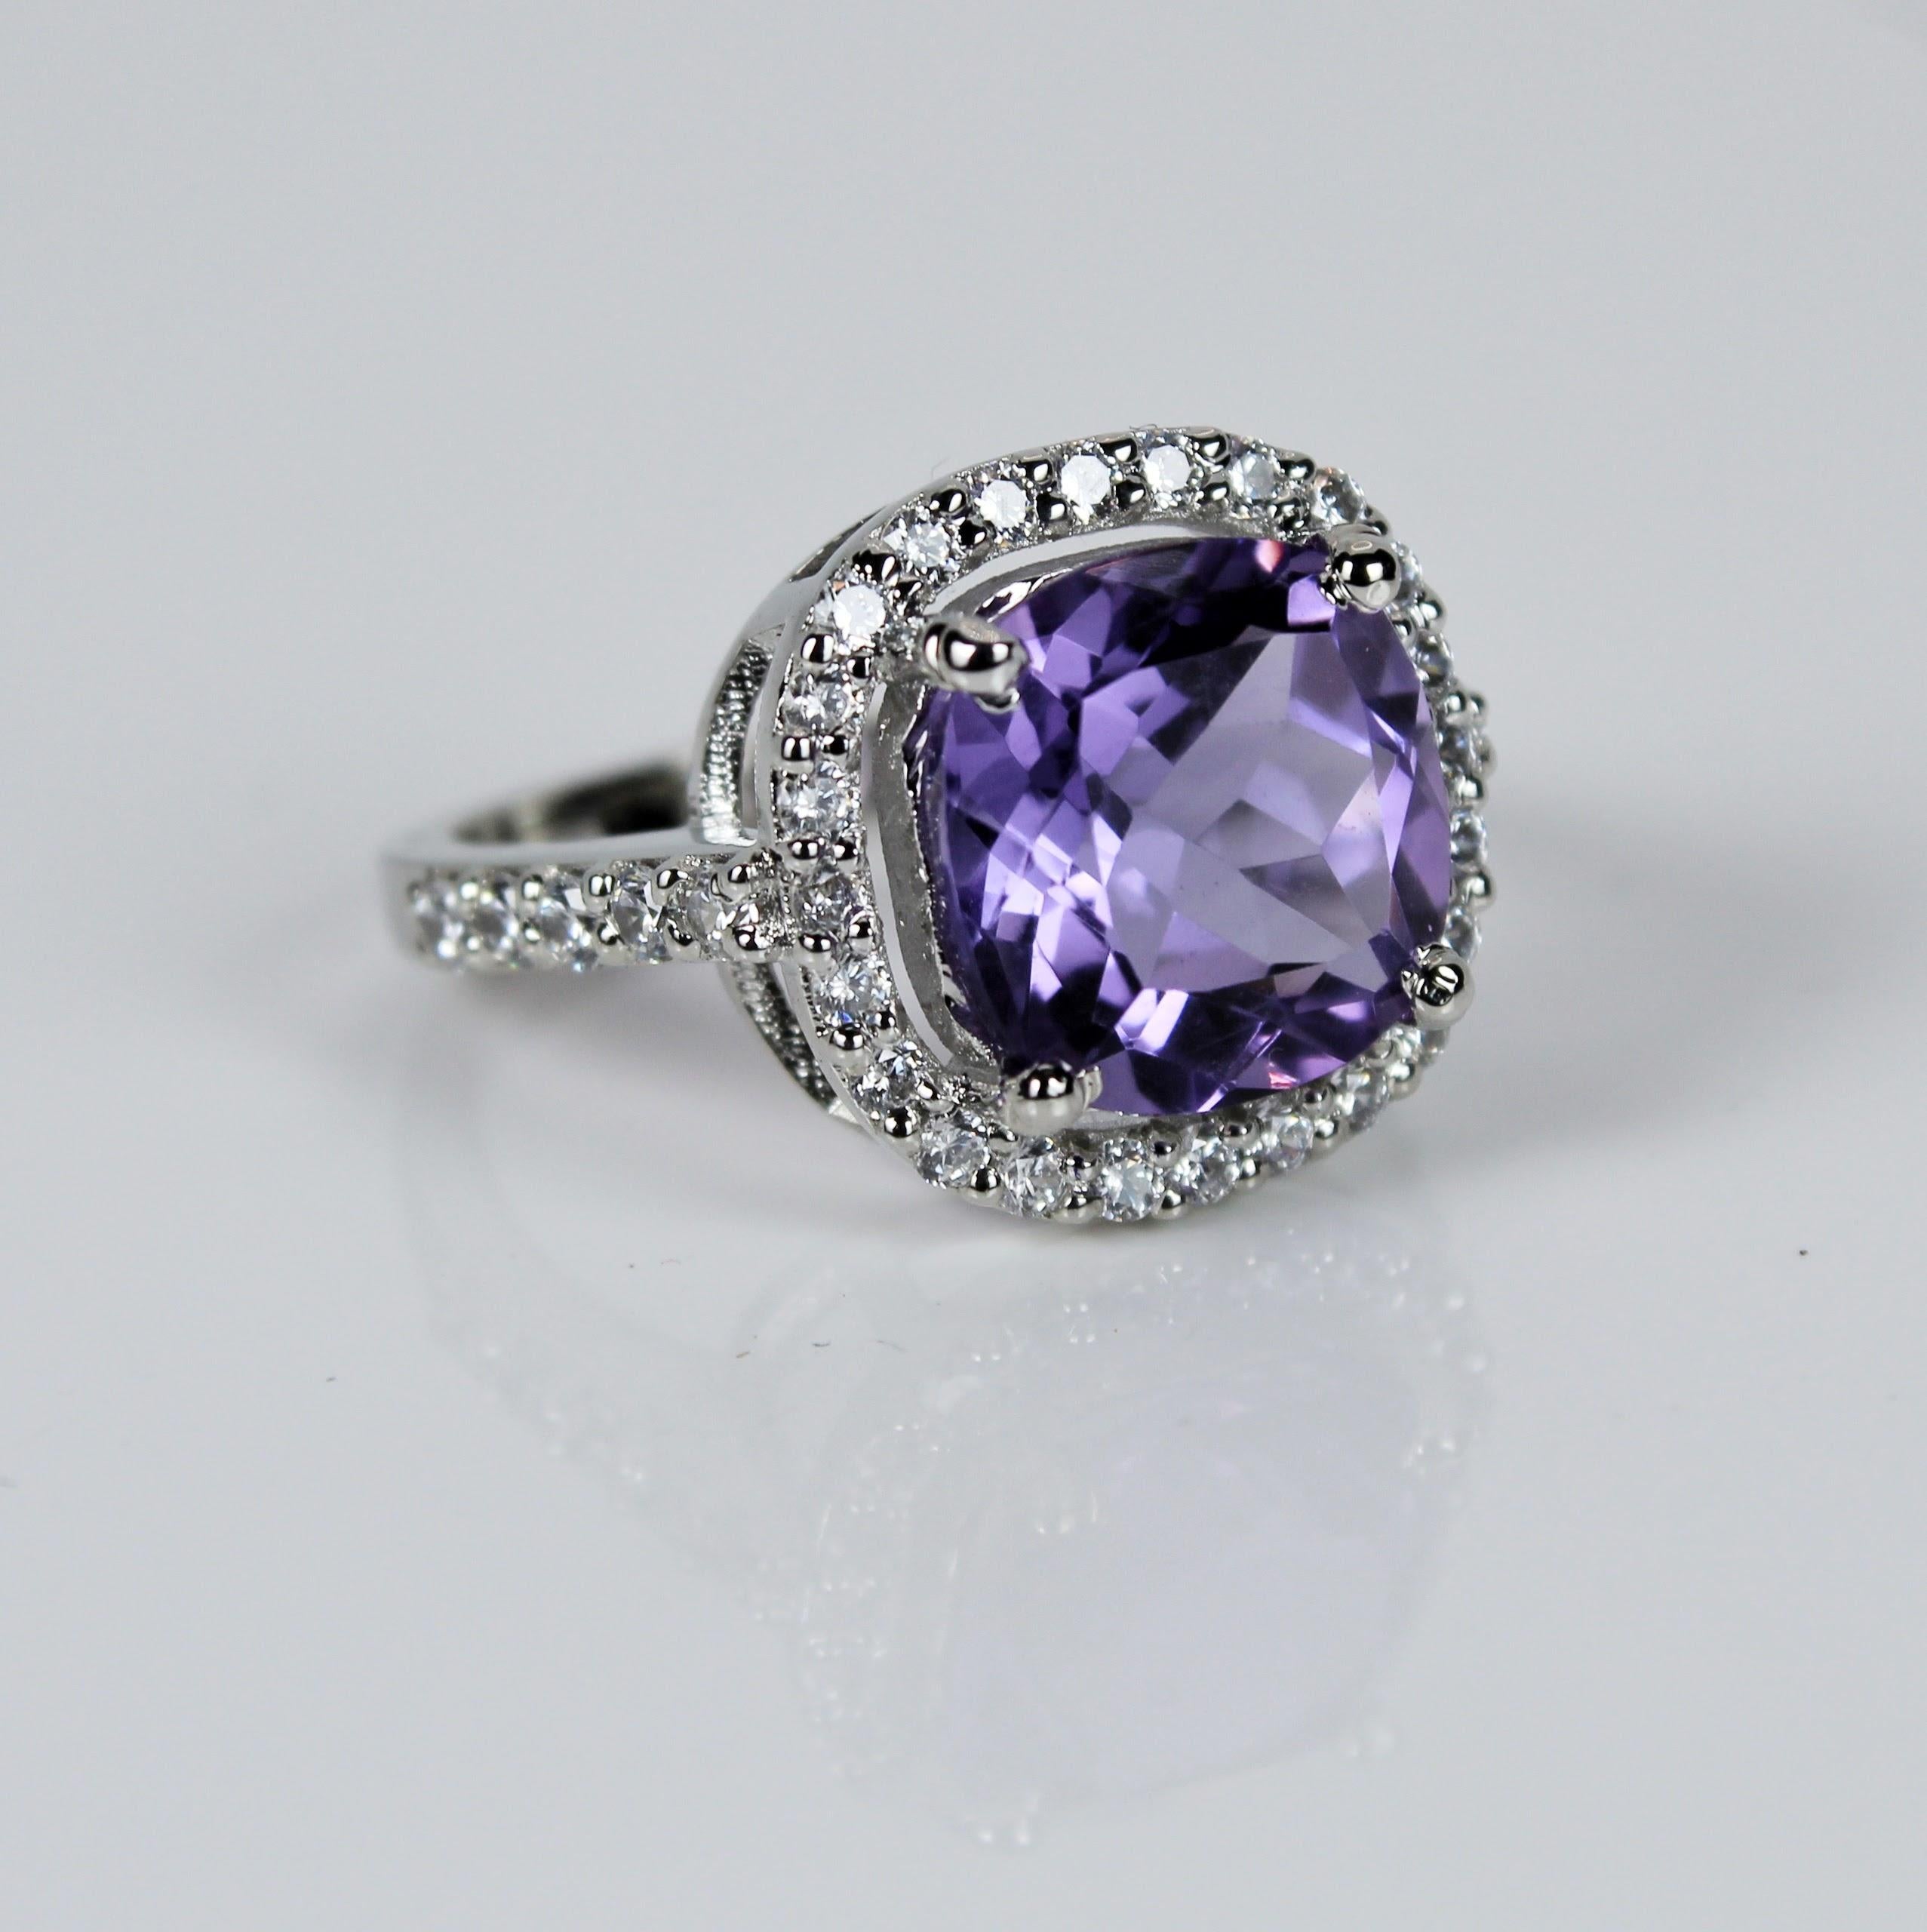 Product Details:

Metal - Silver
Indian ring size - 10
Product gross Weight - 4.360 Grams
Gemstone - Natural amethyst
Stone weight - 4 Carat
Stone shape - Cushion
Stone size - 10 x 10 mm

Elegant designer ring made in silver with beautiful cushion